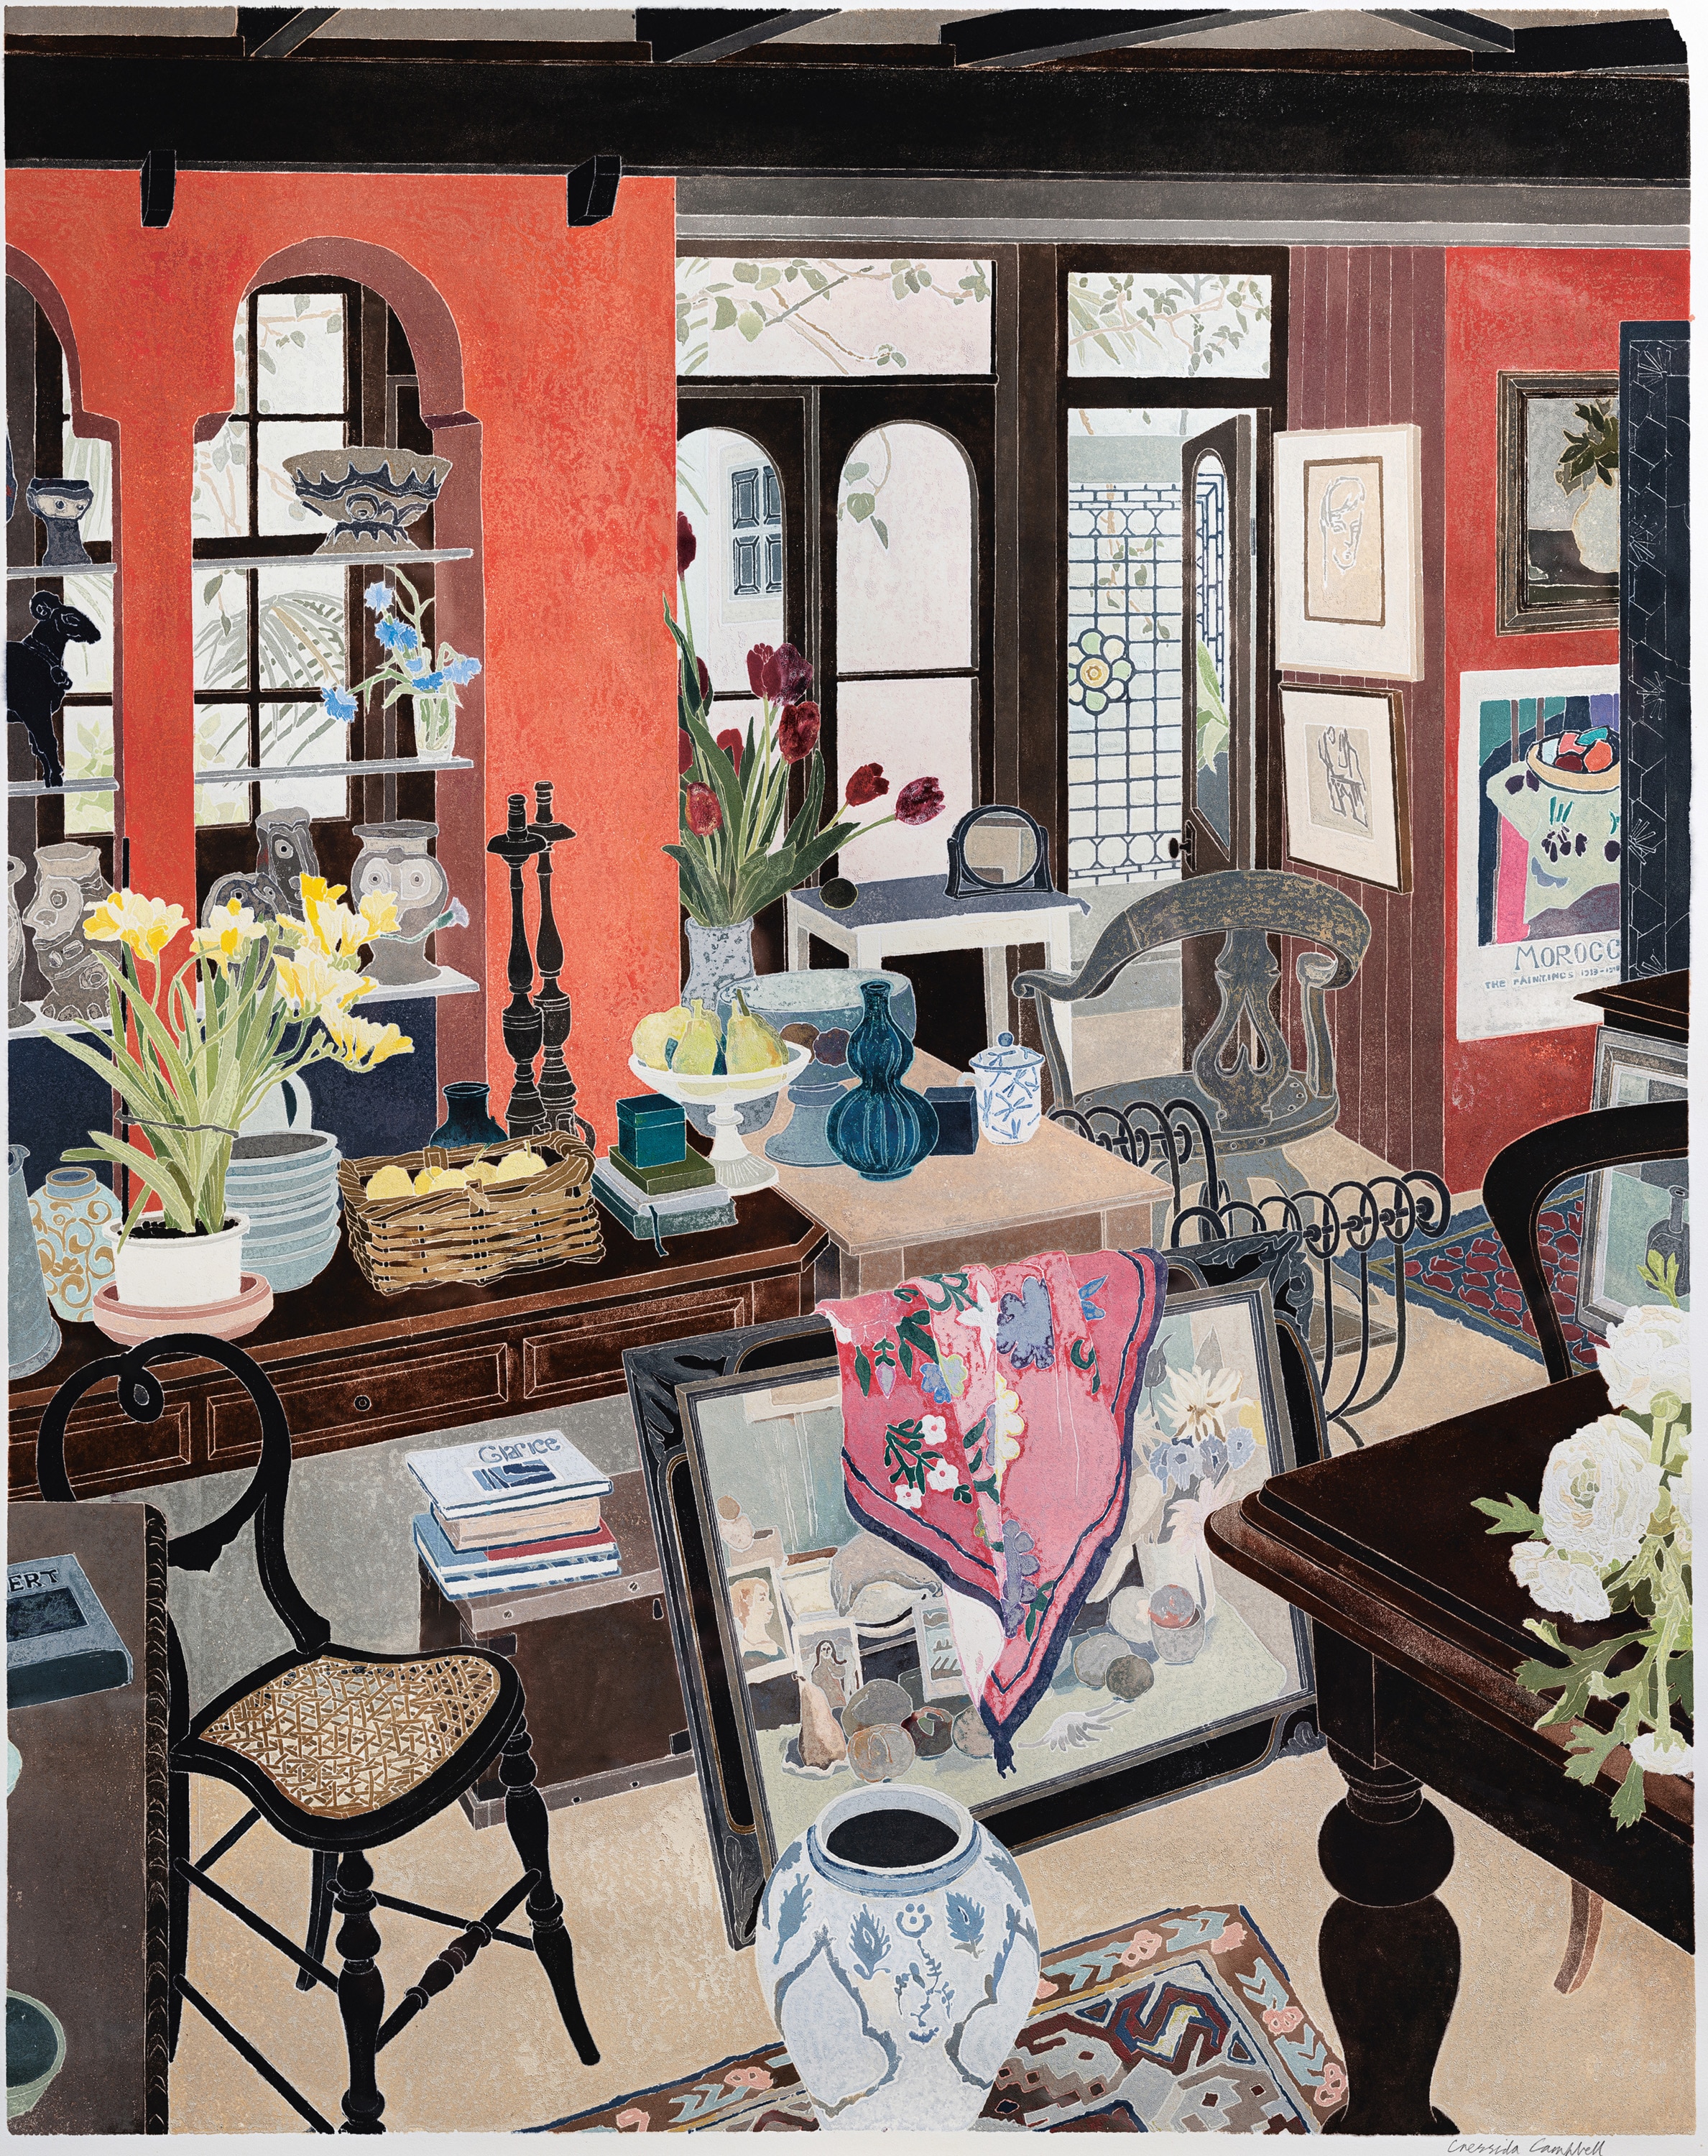 A painting of a cluttered room. In the room are a collection of vases, some with flowers, pears in a fruit bowl, and a painting 